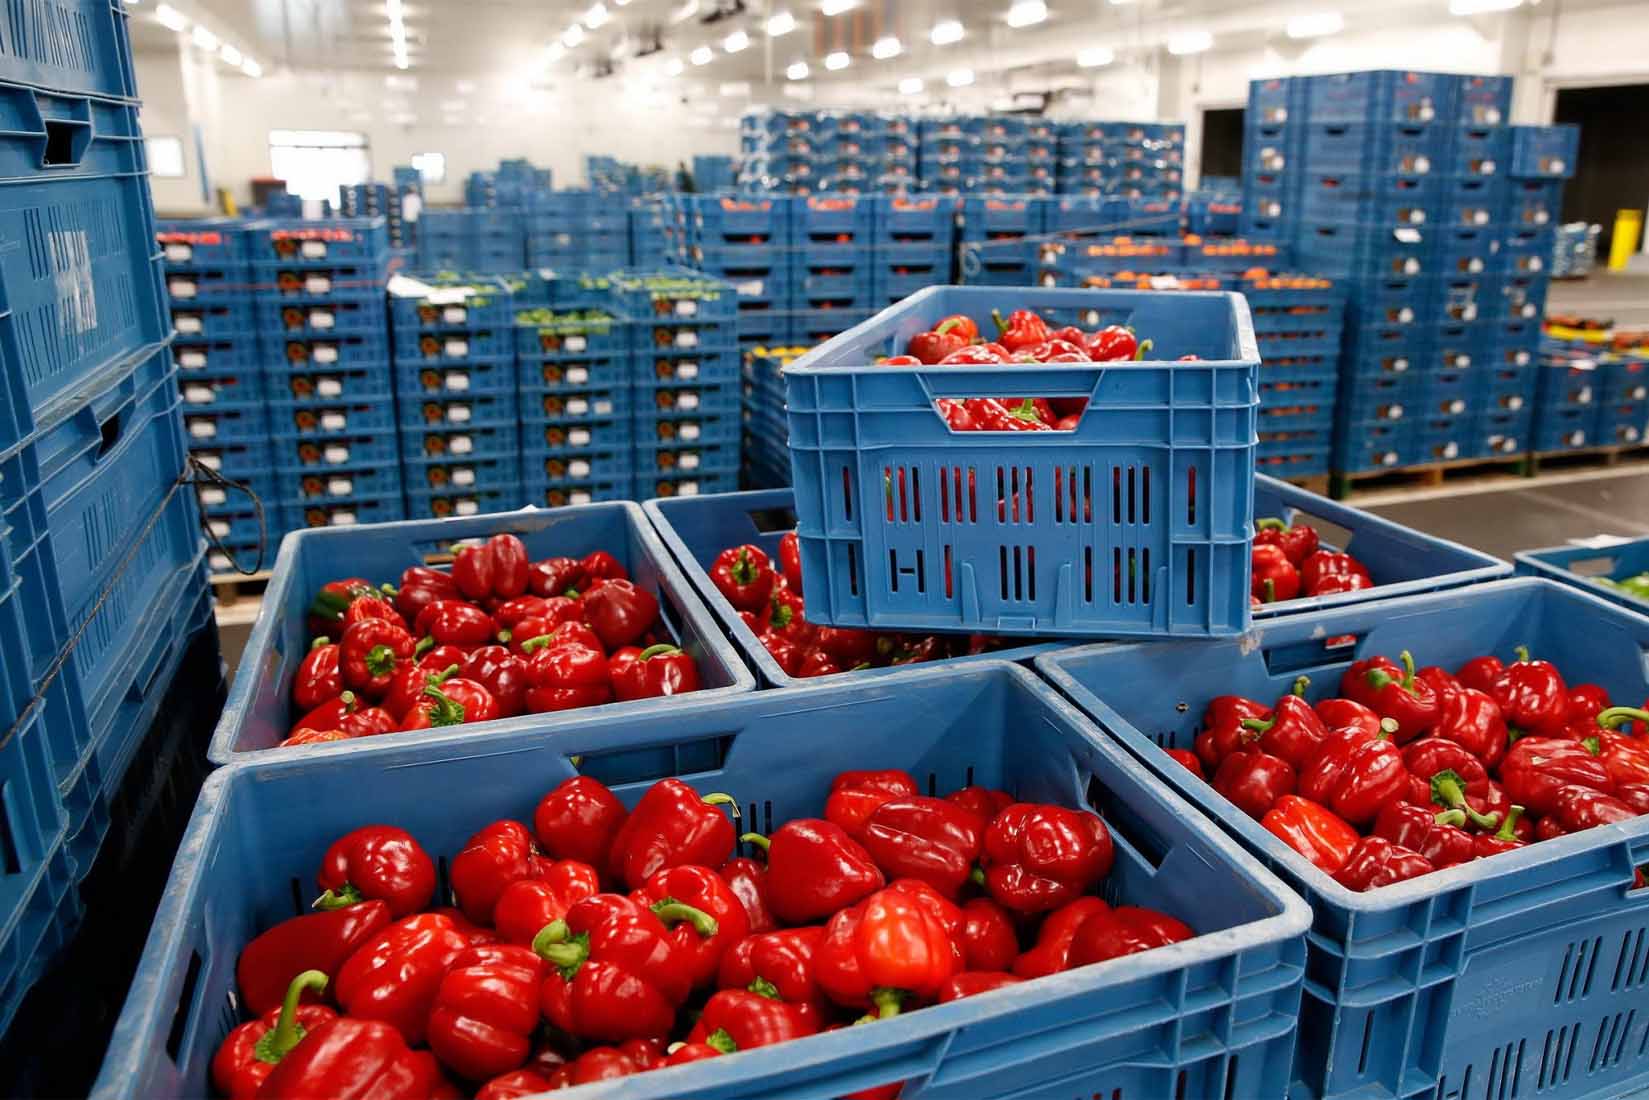 The EU will limit imports of Russian and Belarusian agricultural products